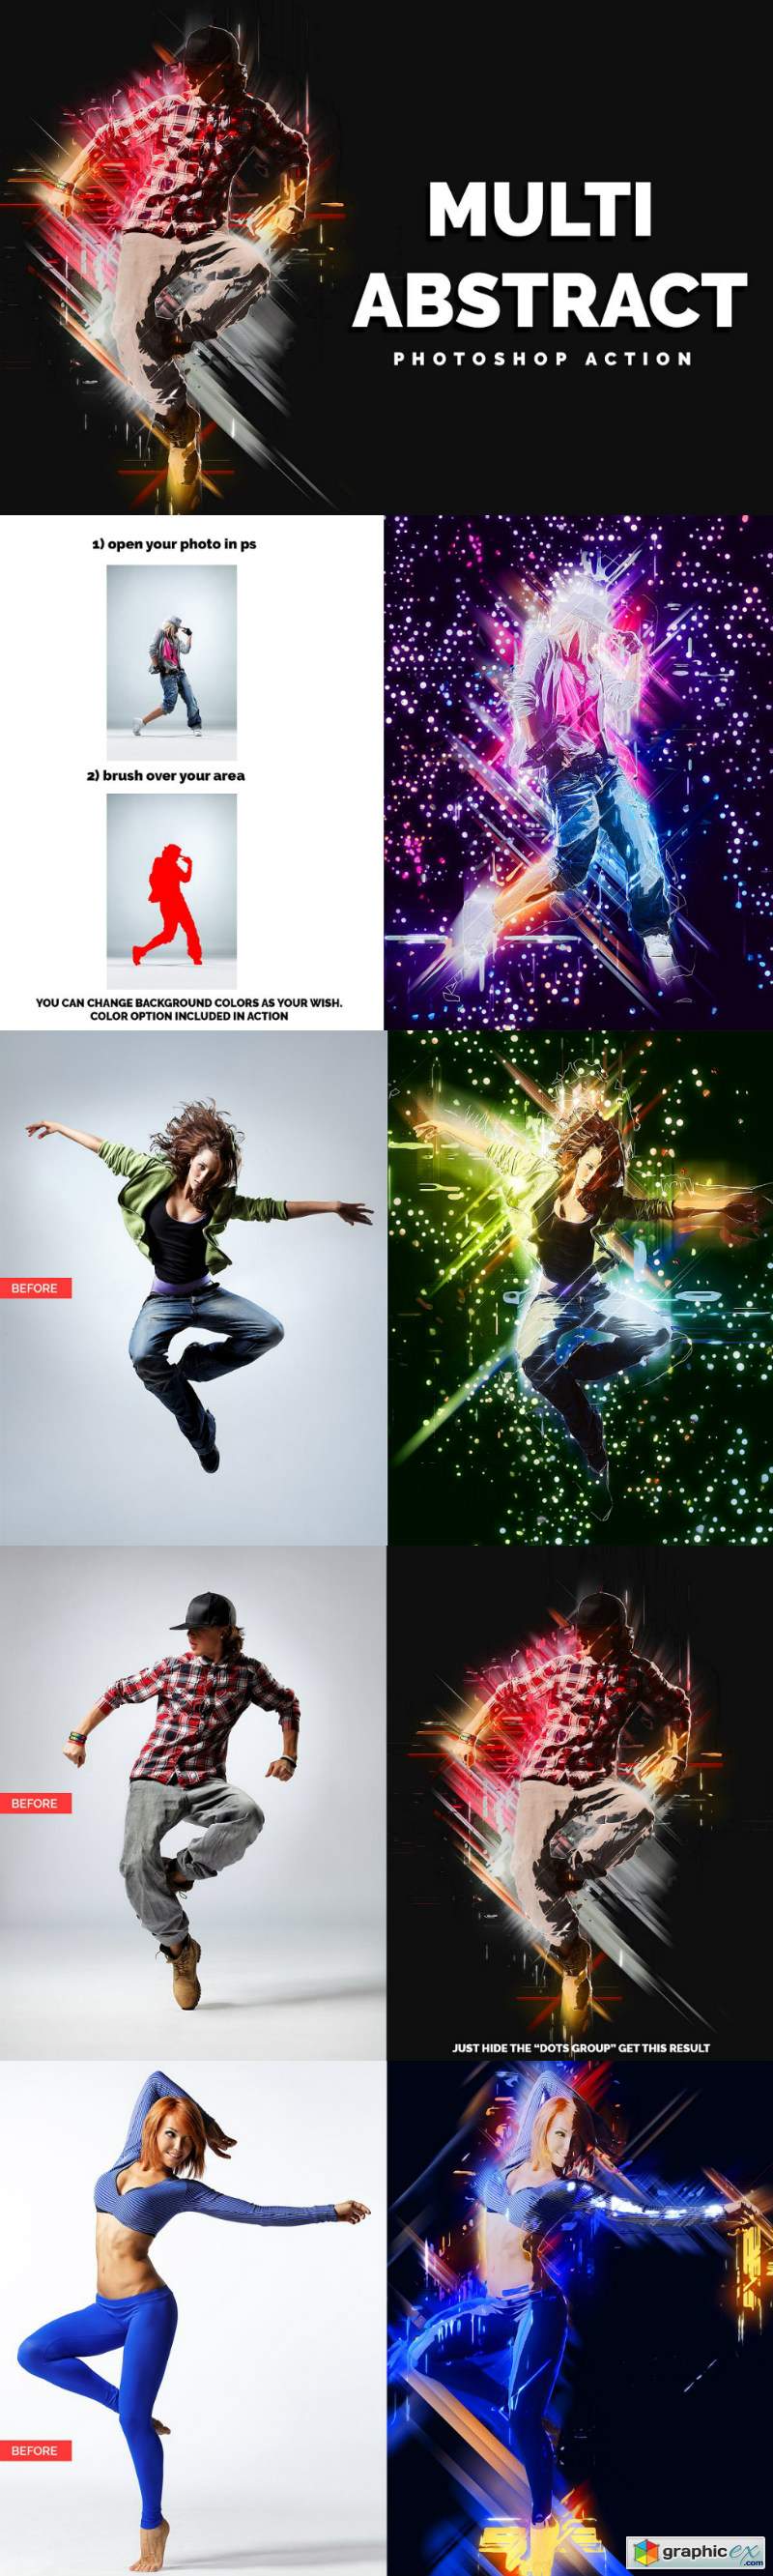 Multi Abstract Photoshop Action